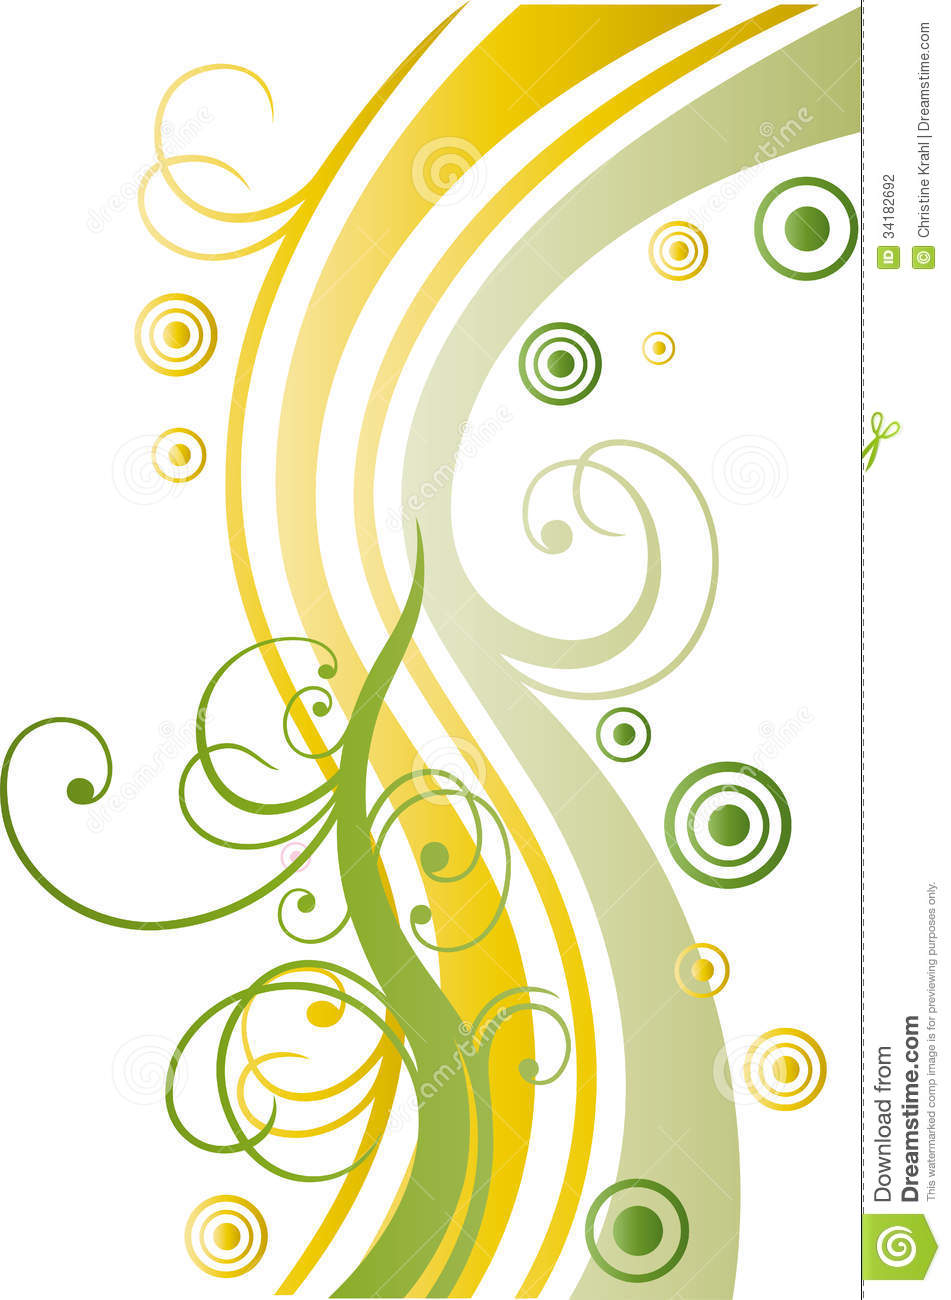 Abstract Border Clipart.